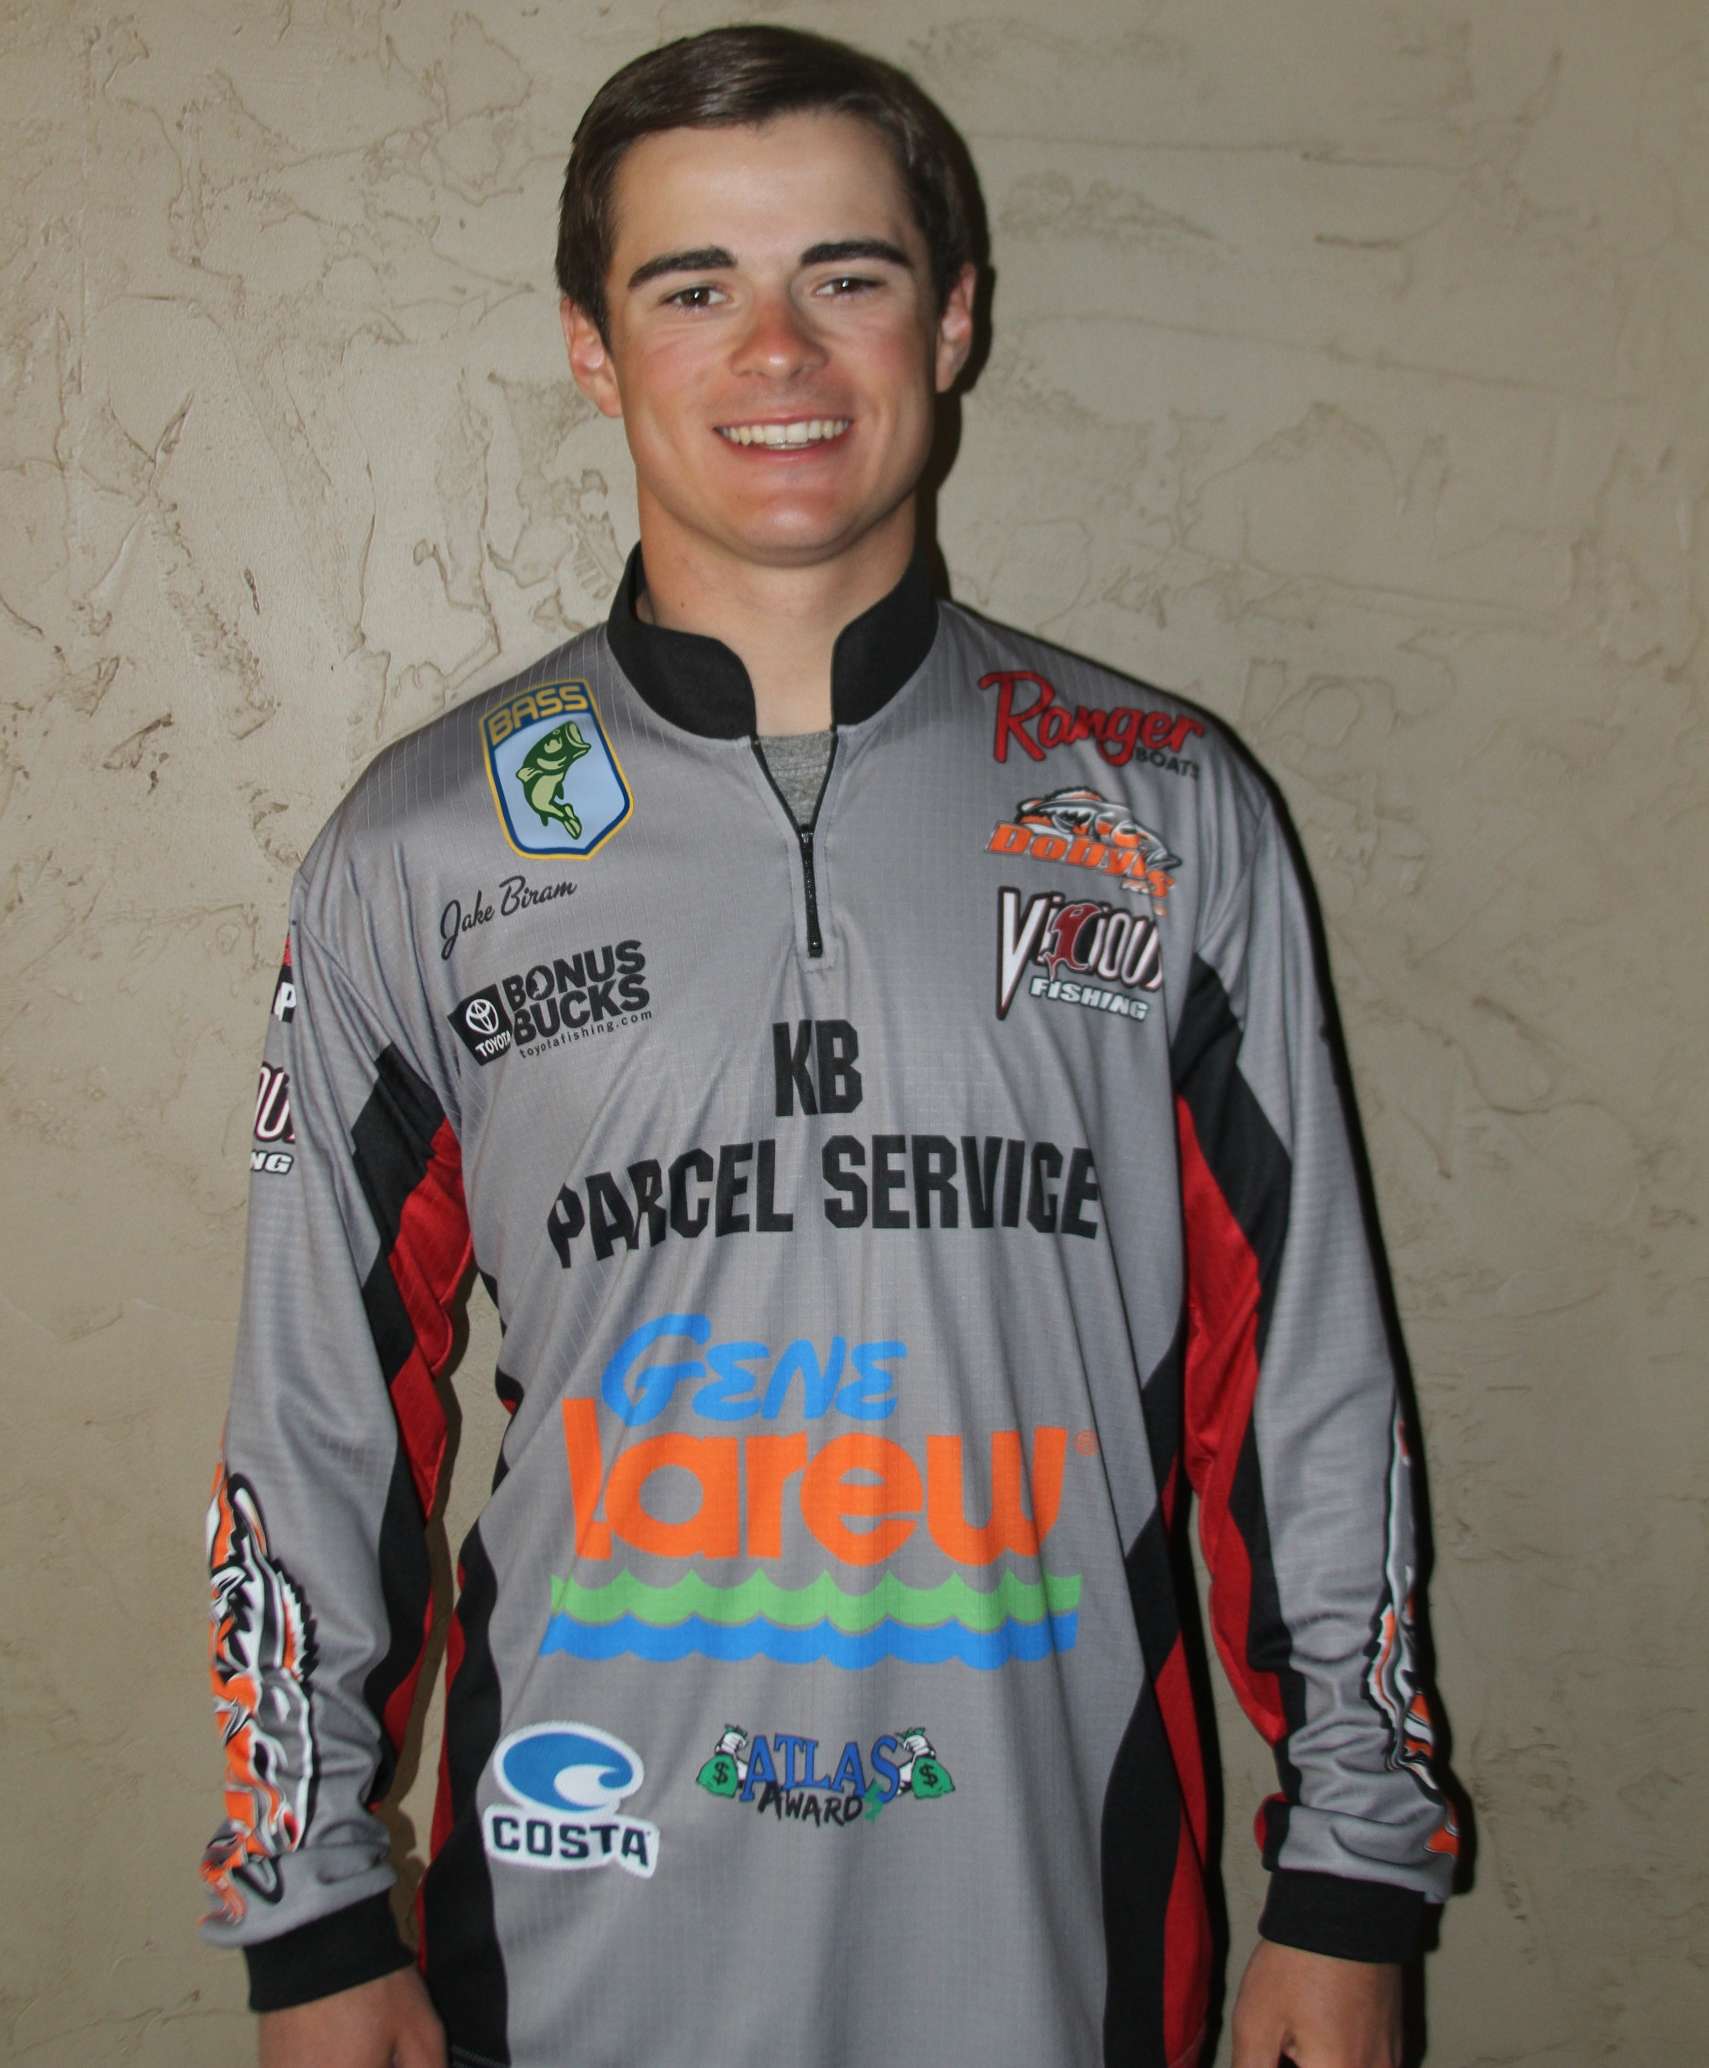 <b>Oklahoma: Jake Biram</b><br>
Biram is a member of the Jenks High School fishing team out of Tulsa, Okla. He is the reason his high school started a fishing club and has worked to grow the sports popularity at his school. Biram earned a first-place finish at the Oklahoma B.A.S.S. Nation Team Trail event on Lake Hudson, as well as three Top 5 tournament finishes.
